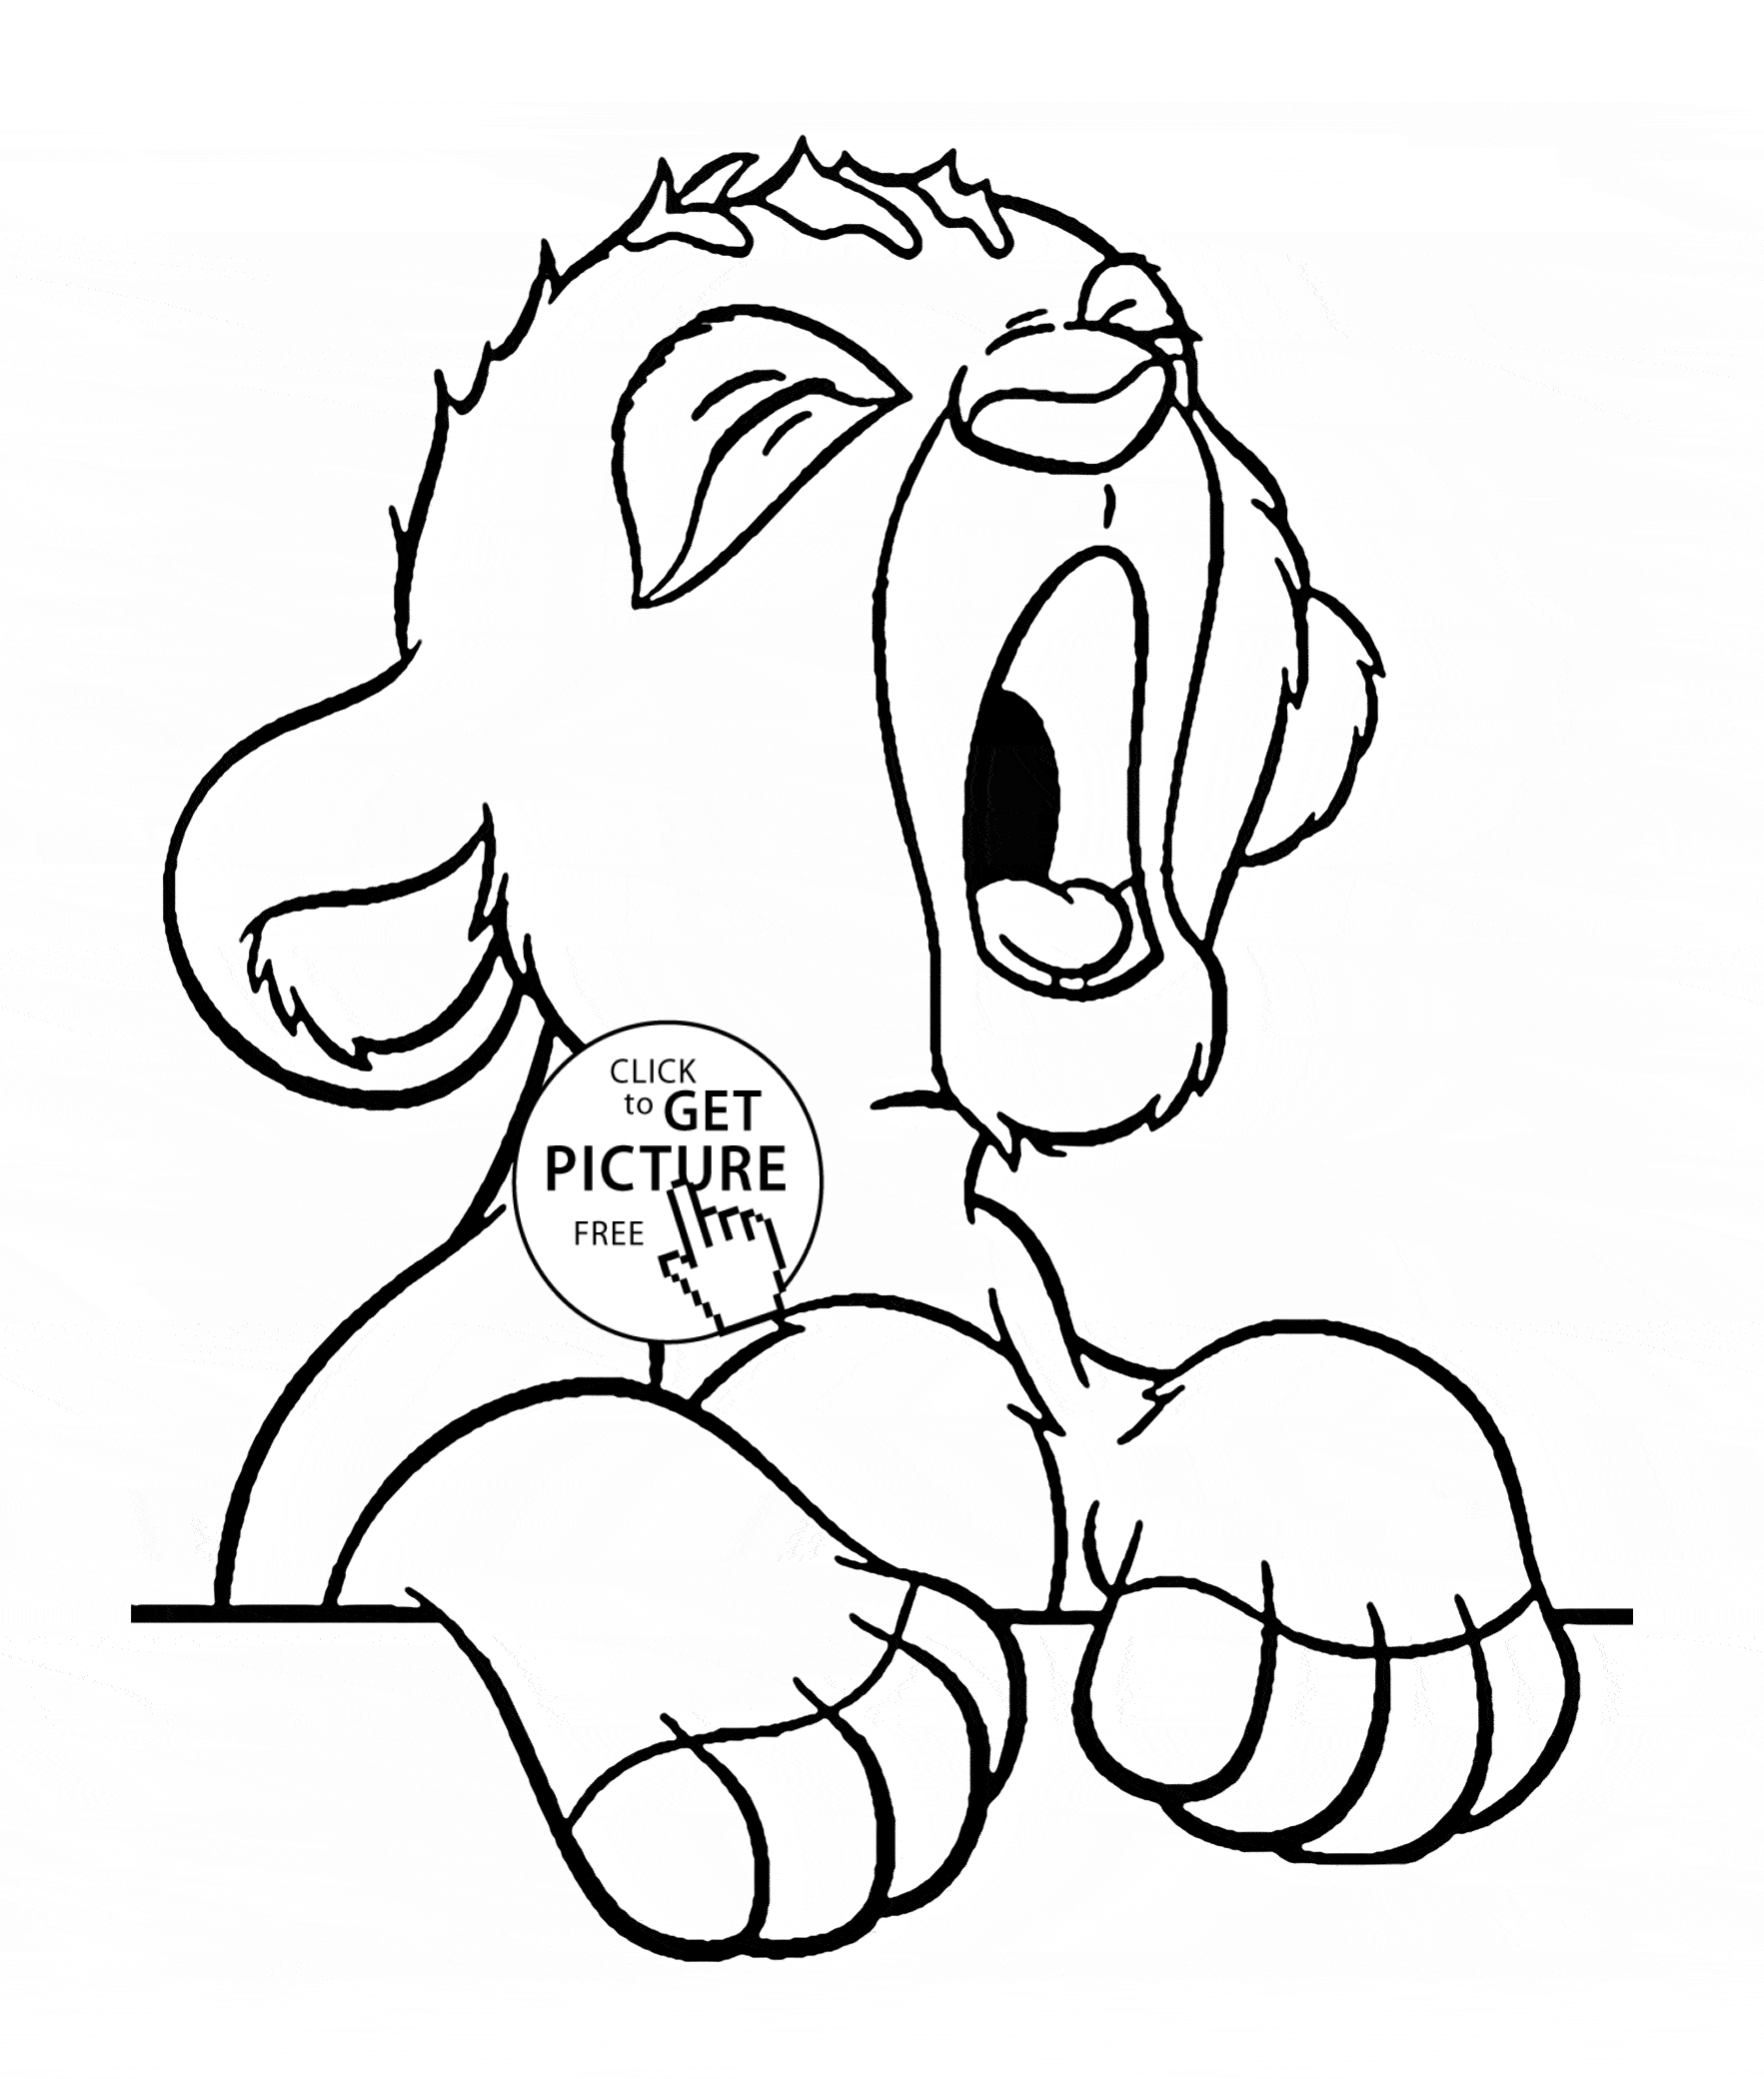 Funny Animal 14 For Kids Coloring Page